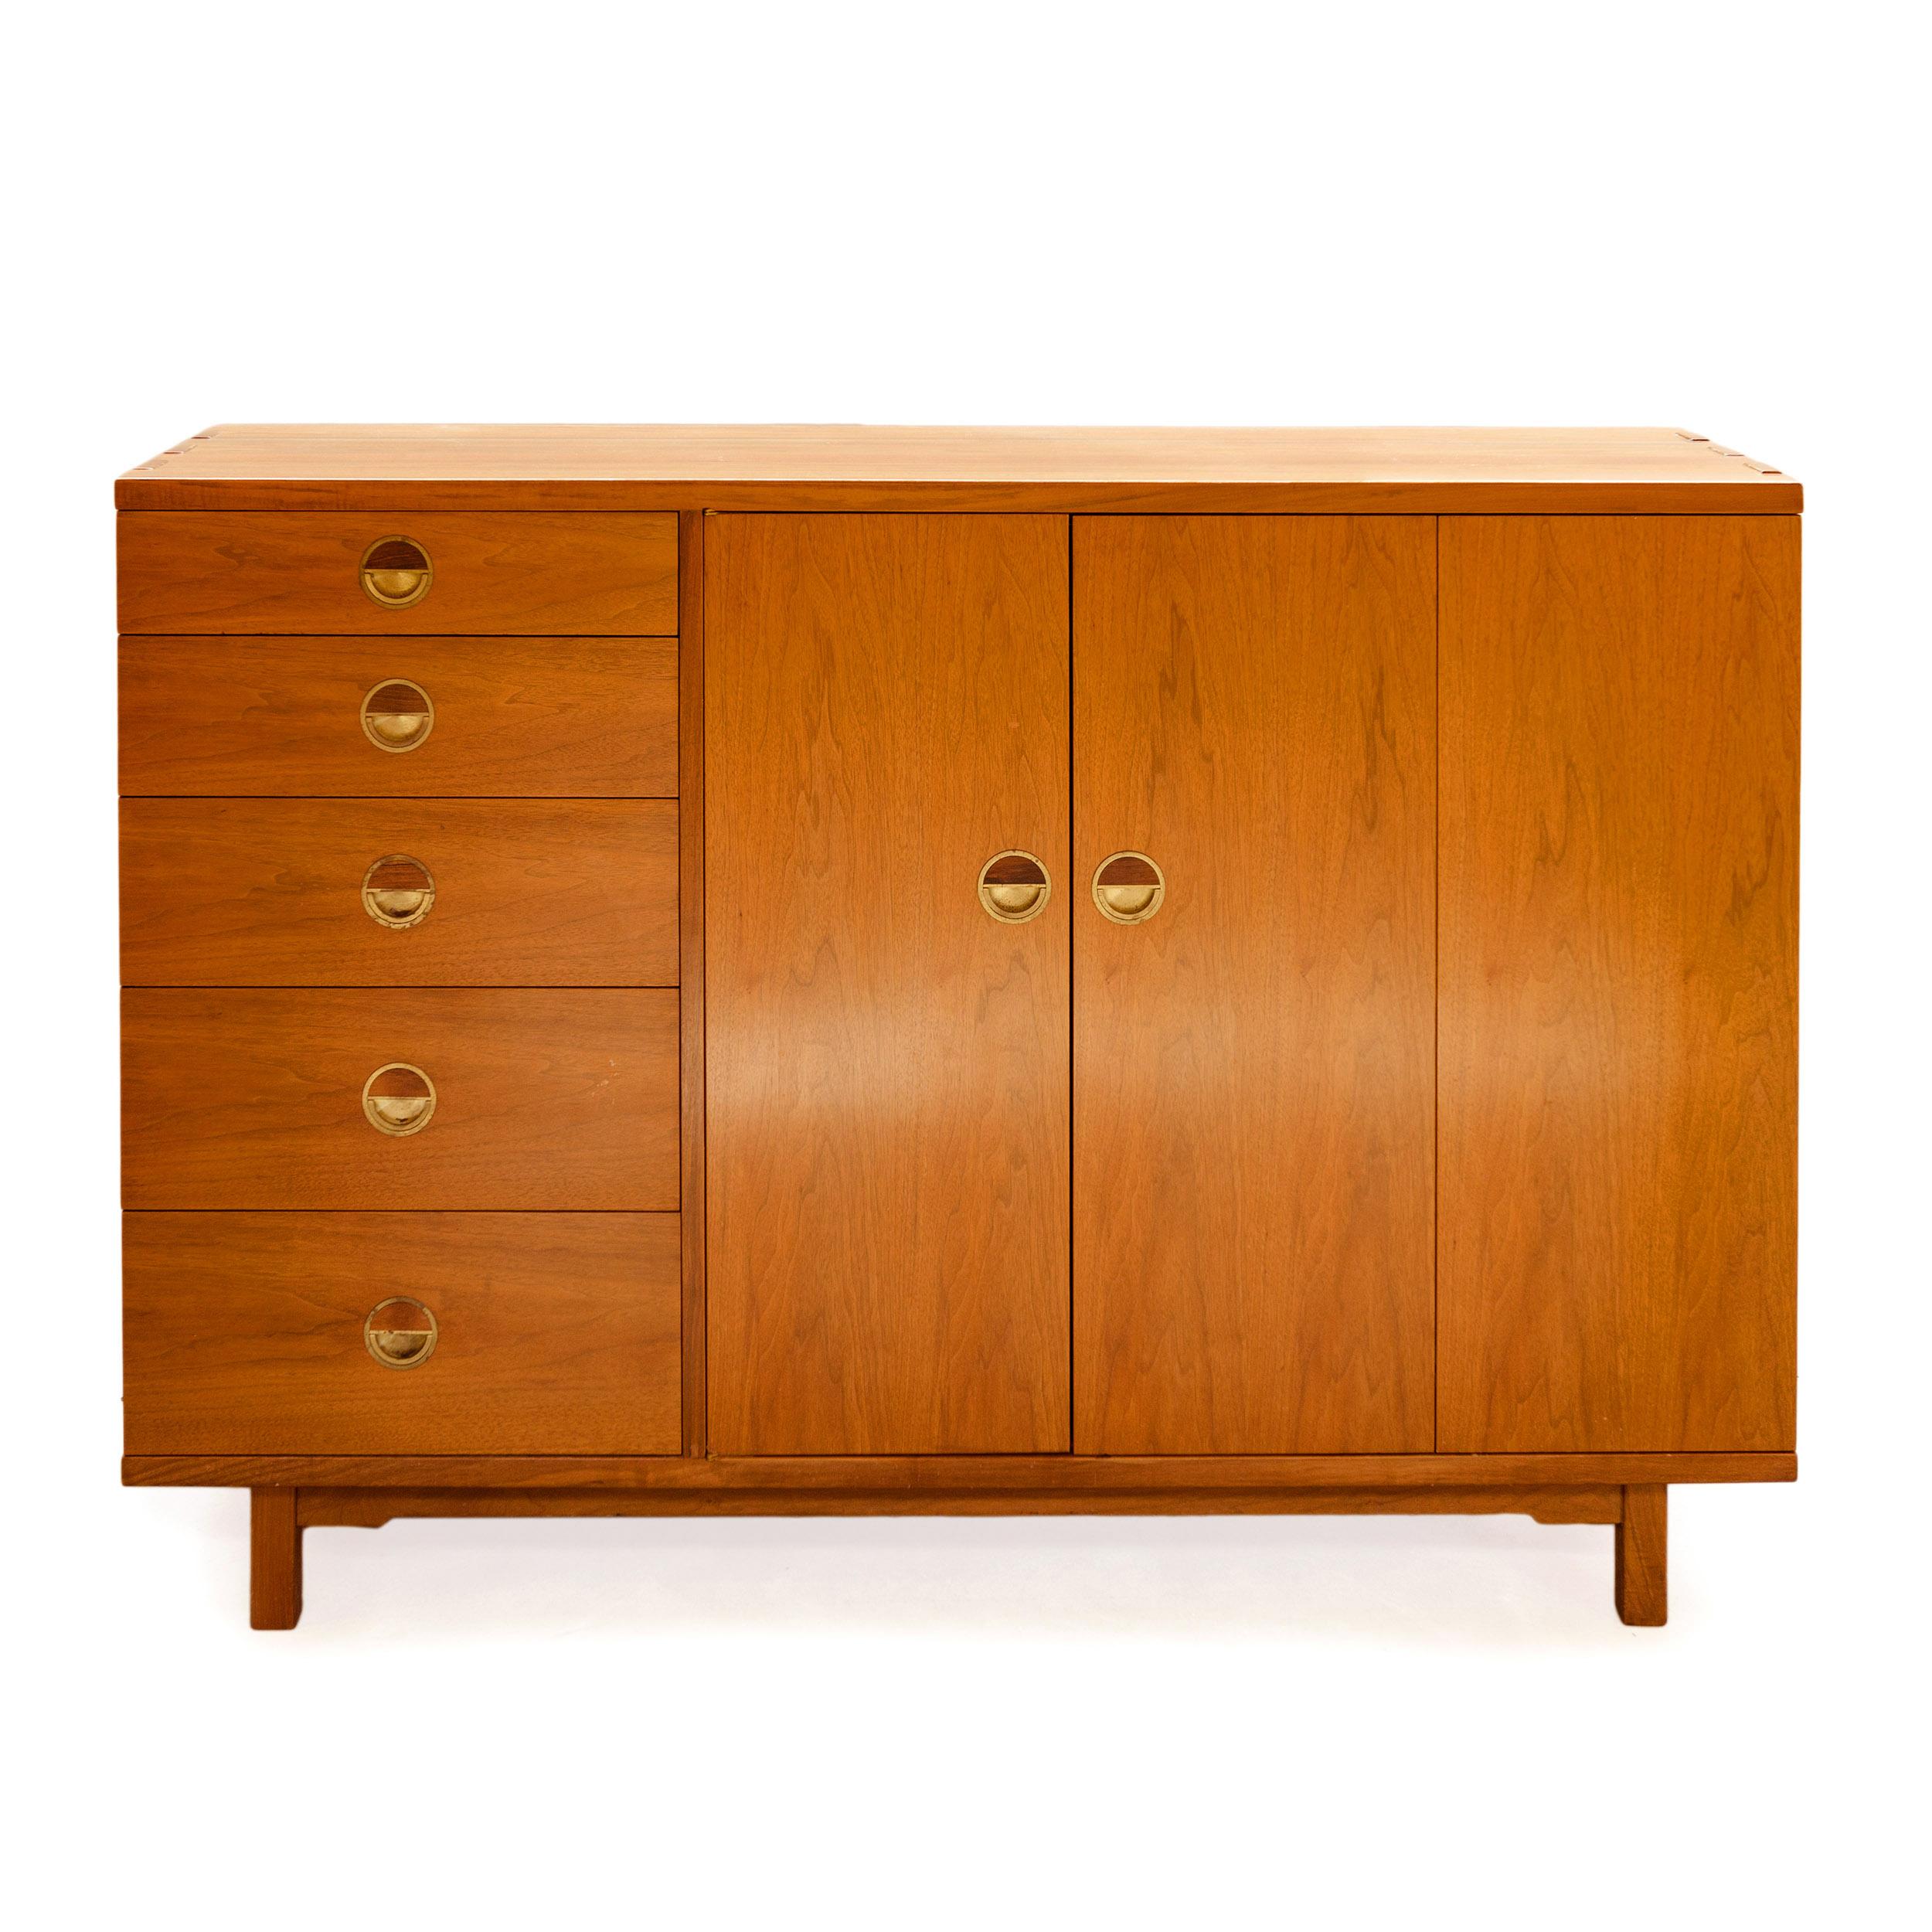 An asymmetrical dresser in solid walnut with exposed finger jointed joinery, having a shelved compartment accessed by bi-fold doors flanked by a bank of five drawers with exquisite brass hinged ring pulls inset with rosewood.